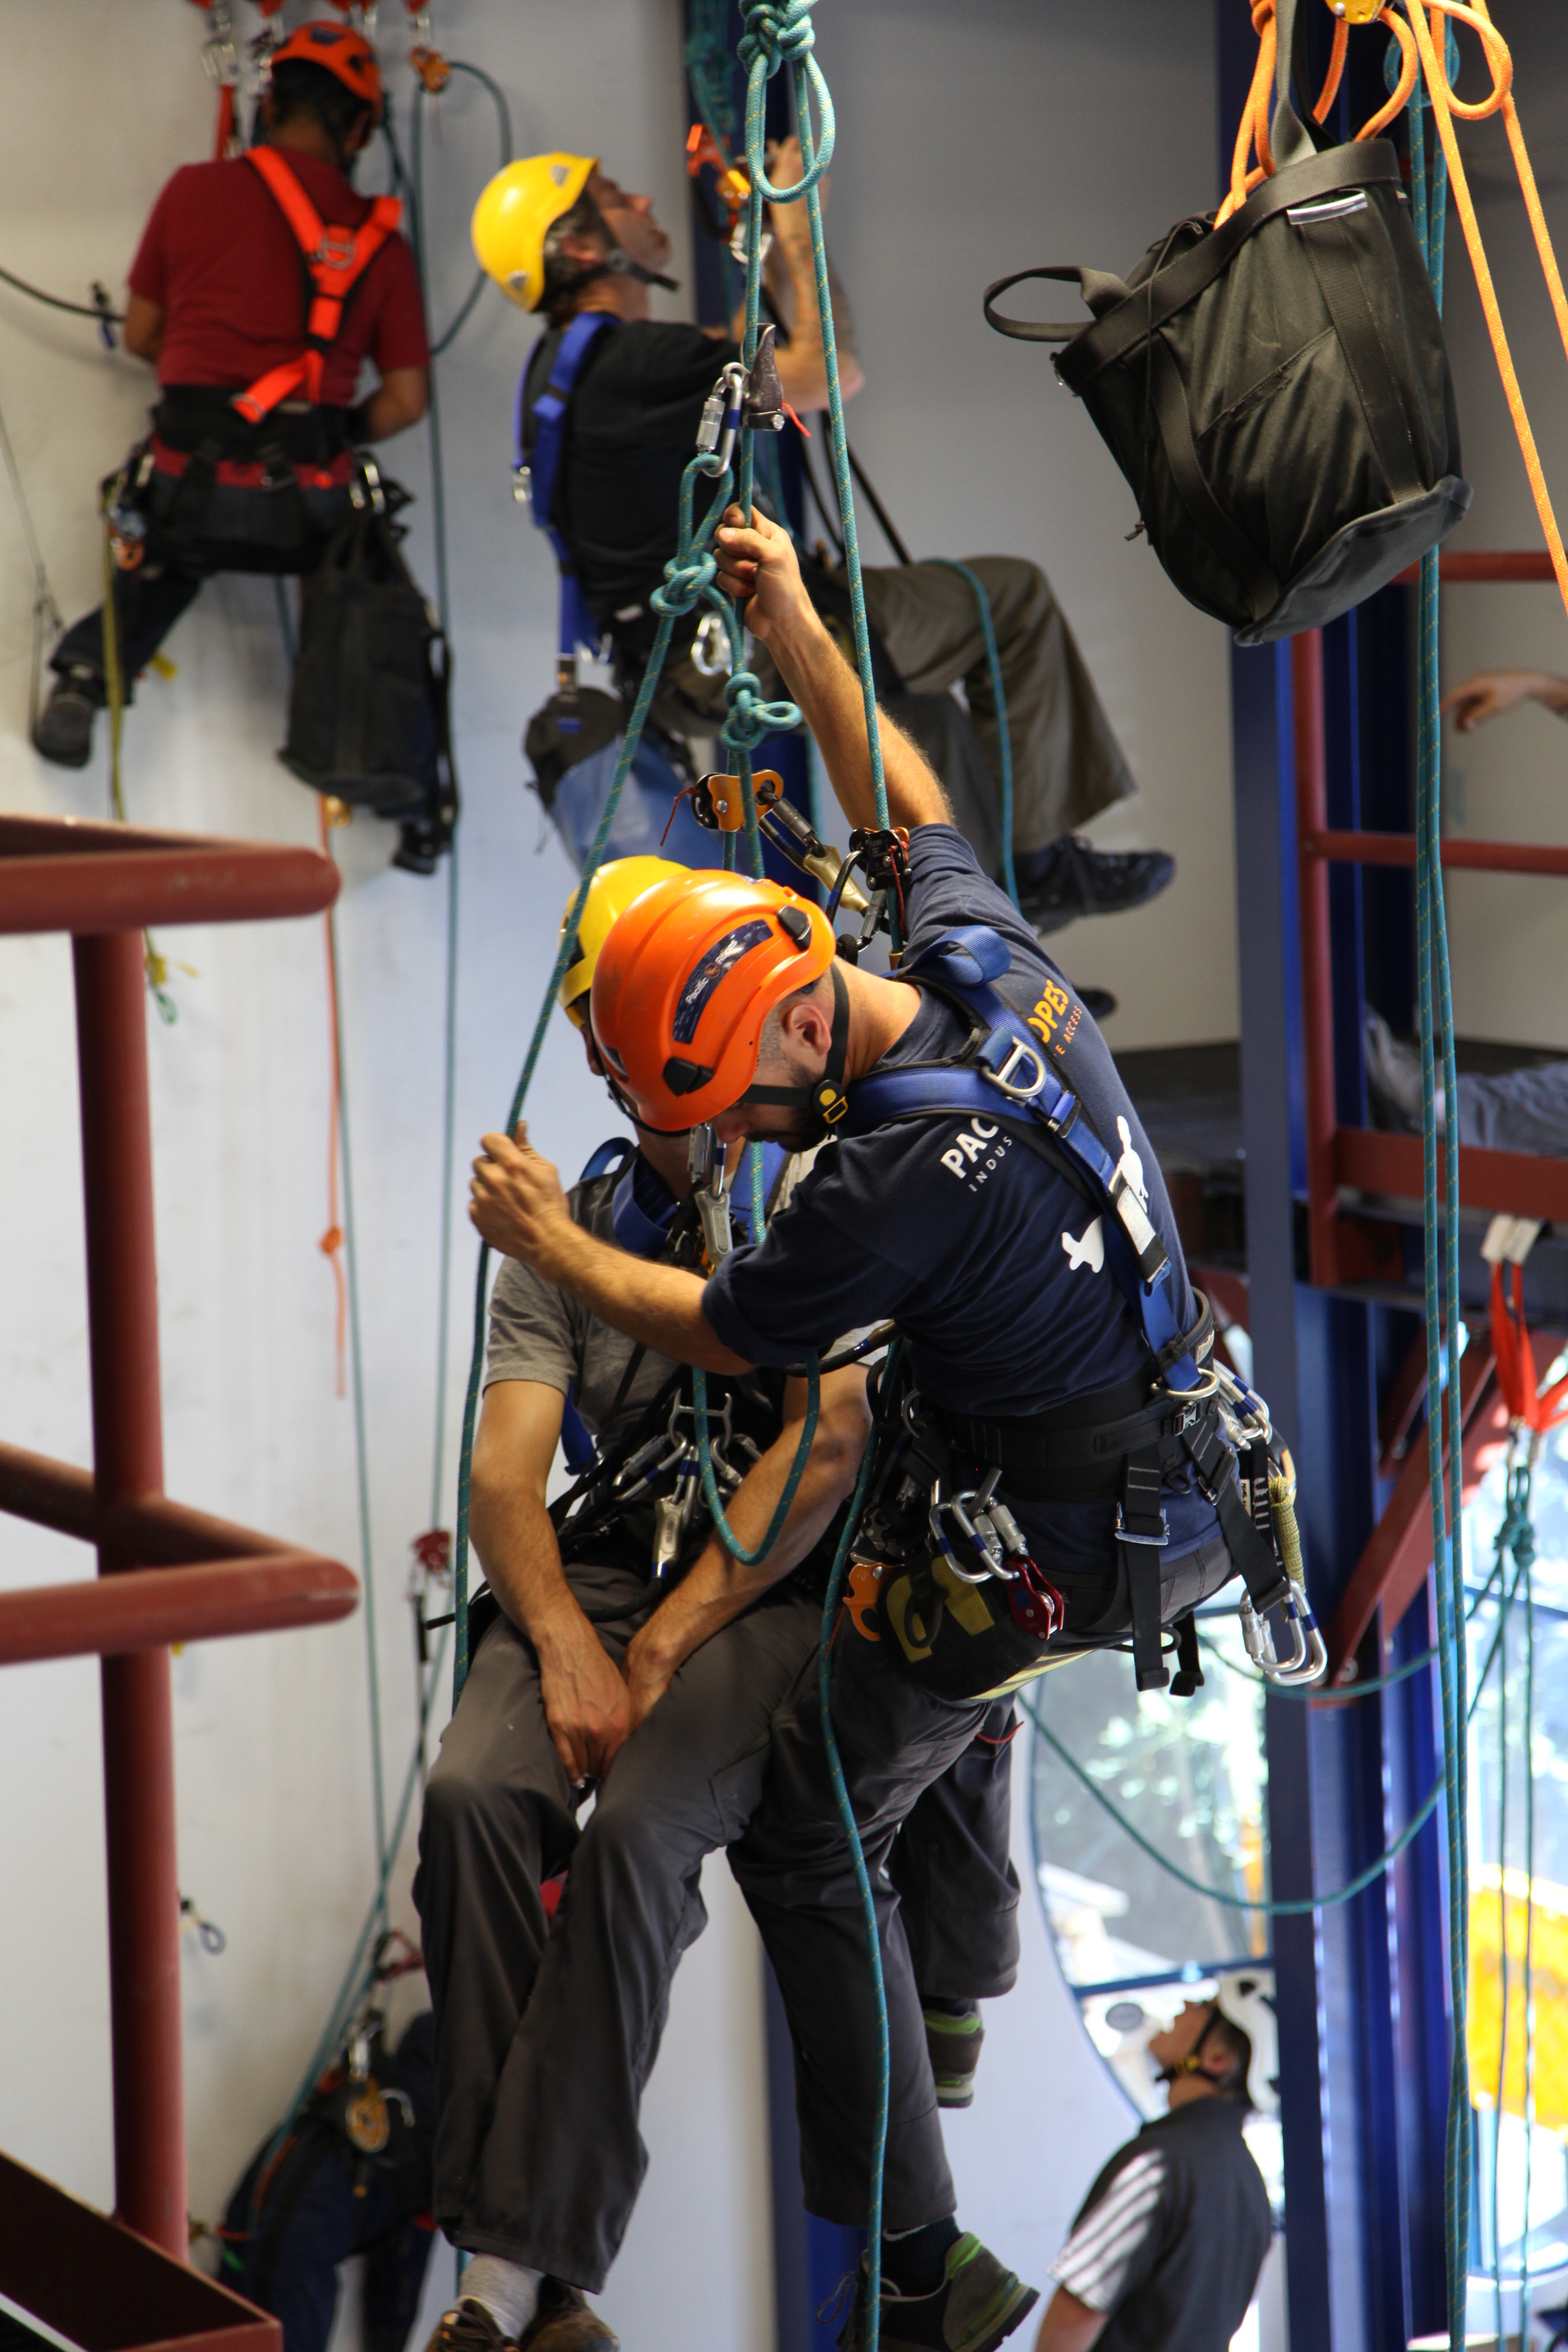 Rope Access and Technical Rope Rescue